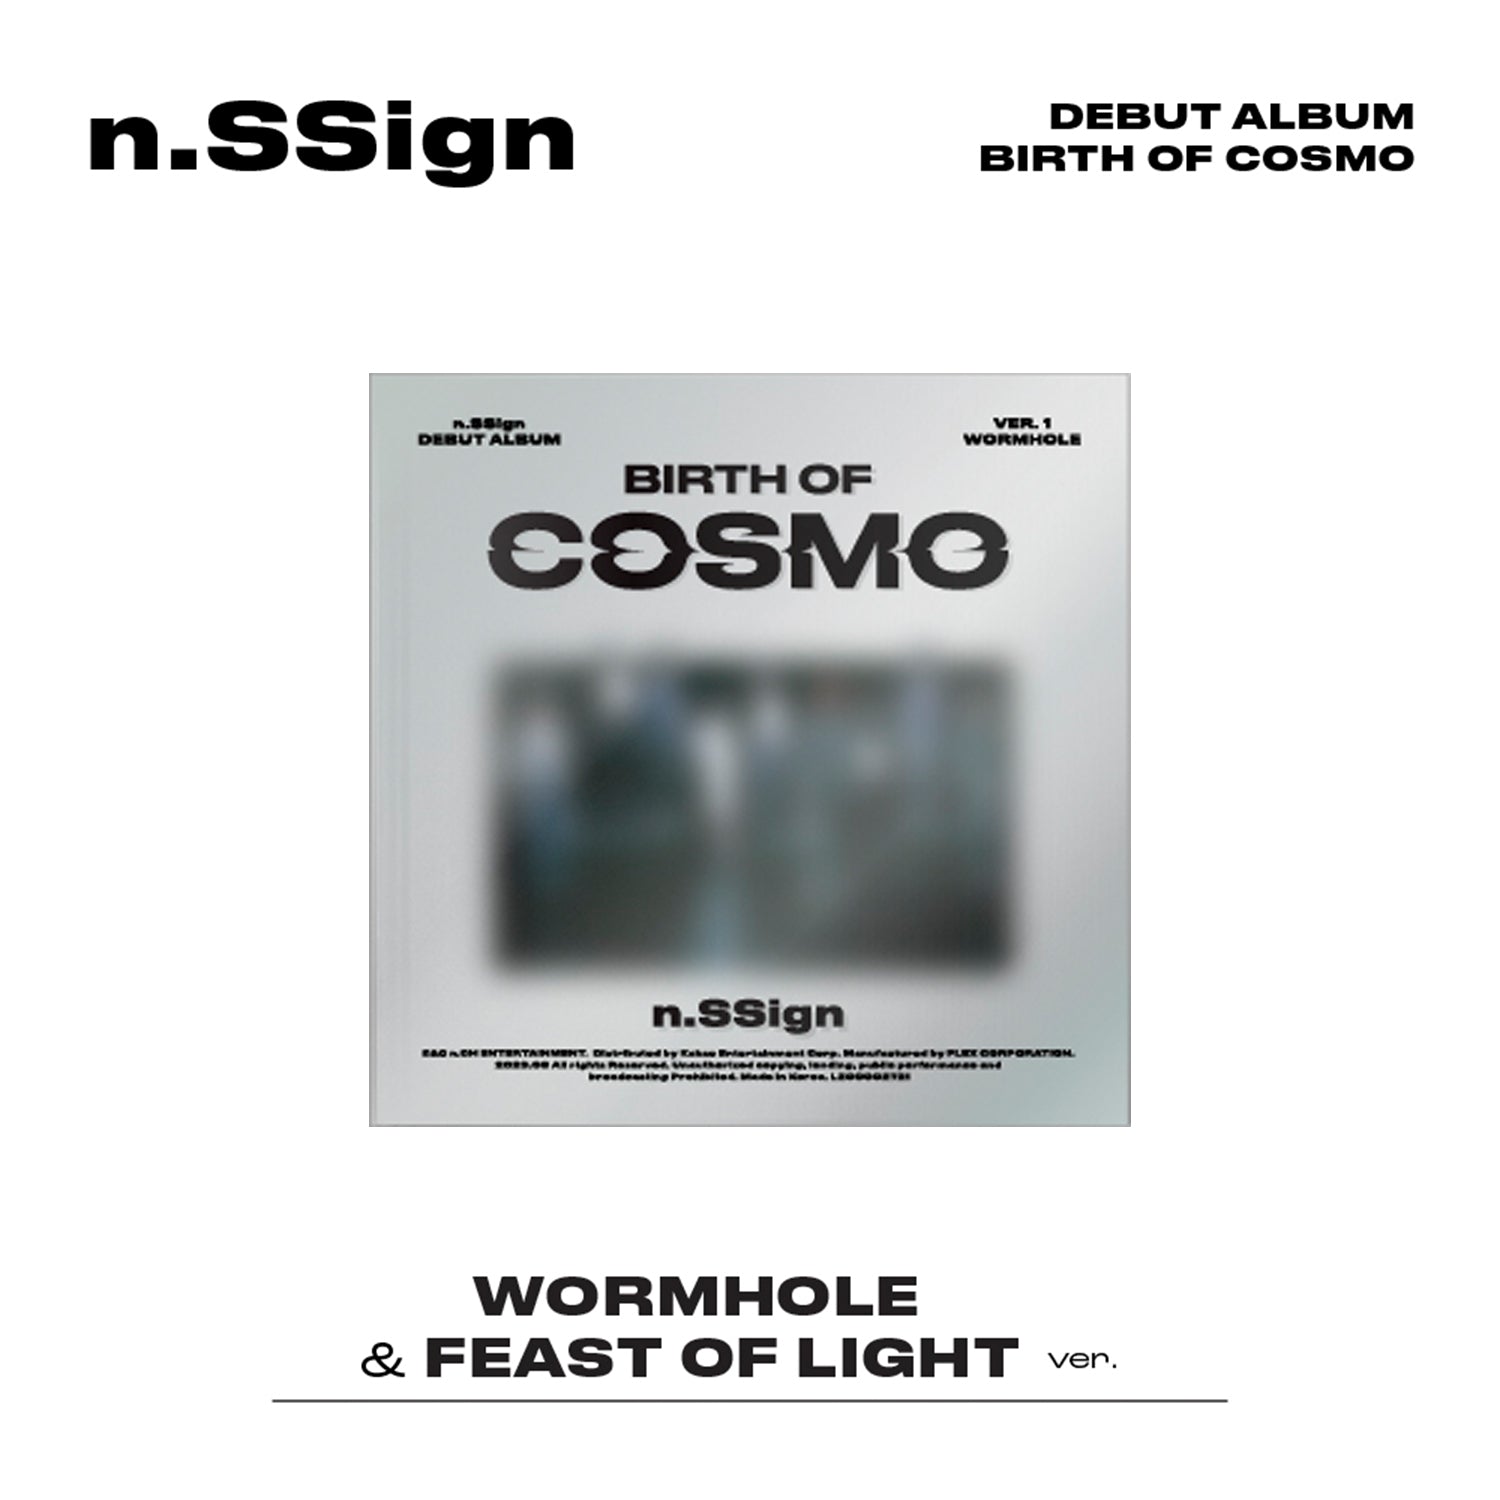 N.SSIGN DEBUT ALBUM 'BIRTH OF COSMO' WORMHOLE VERSION COVER